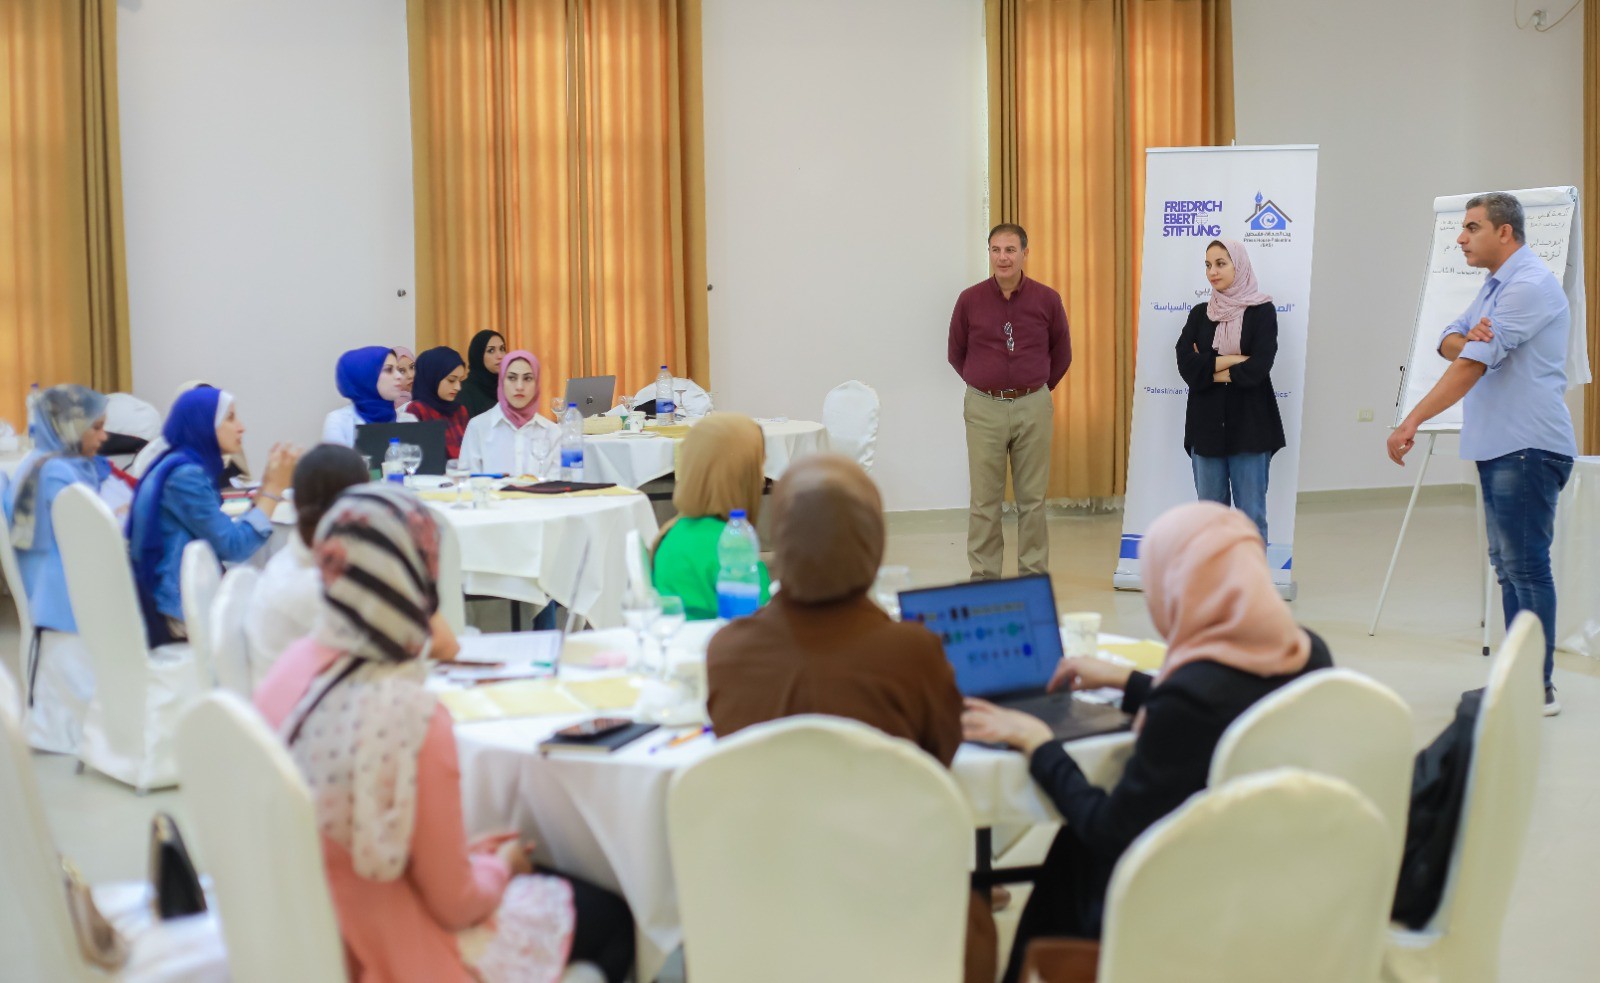 Press House concludes the "Creative Writing for Political Article" training